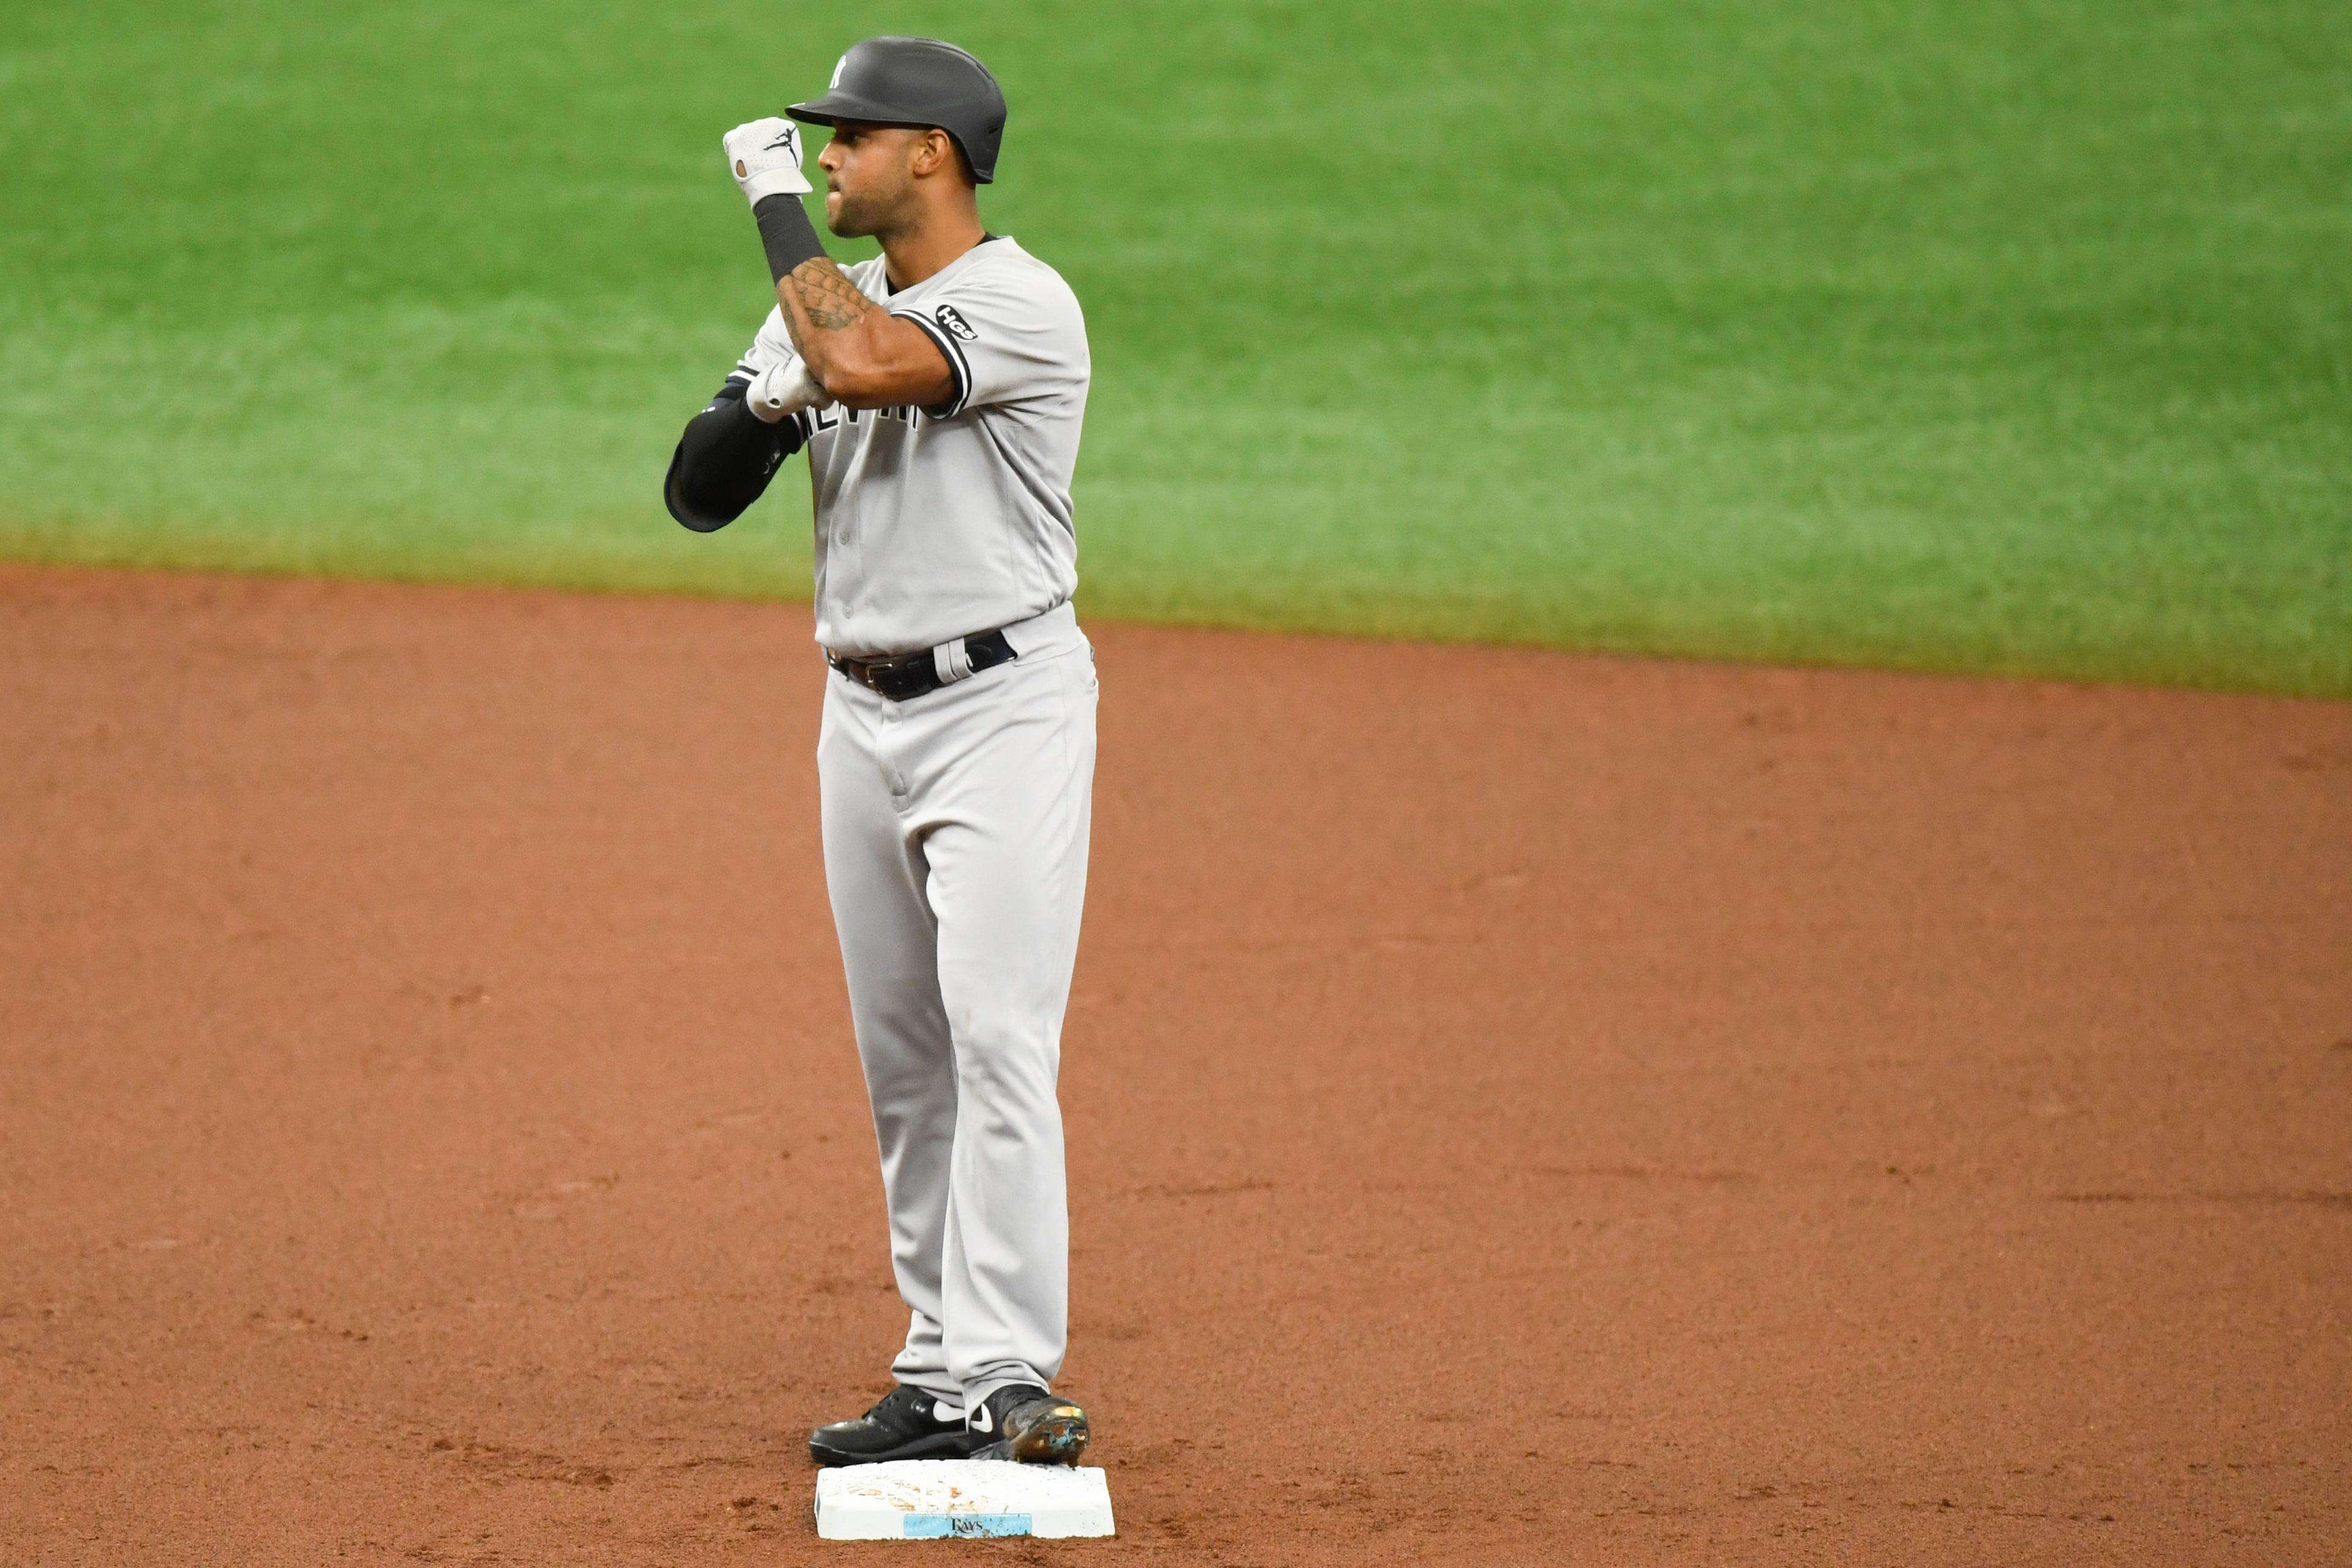 Aug 9, 2020; St. Petersburg, Florida, USA; New York Yankees center fielder Aaron Hicks (31) reacts after hitting a double during the first inning against the Tampa Bay Rays at Tropicana Field. / Douglas DeFelice-USA TODAY Sports